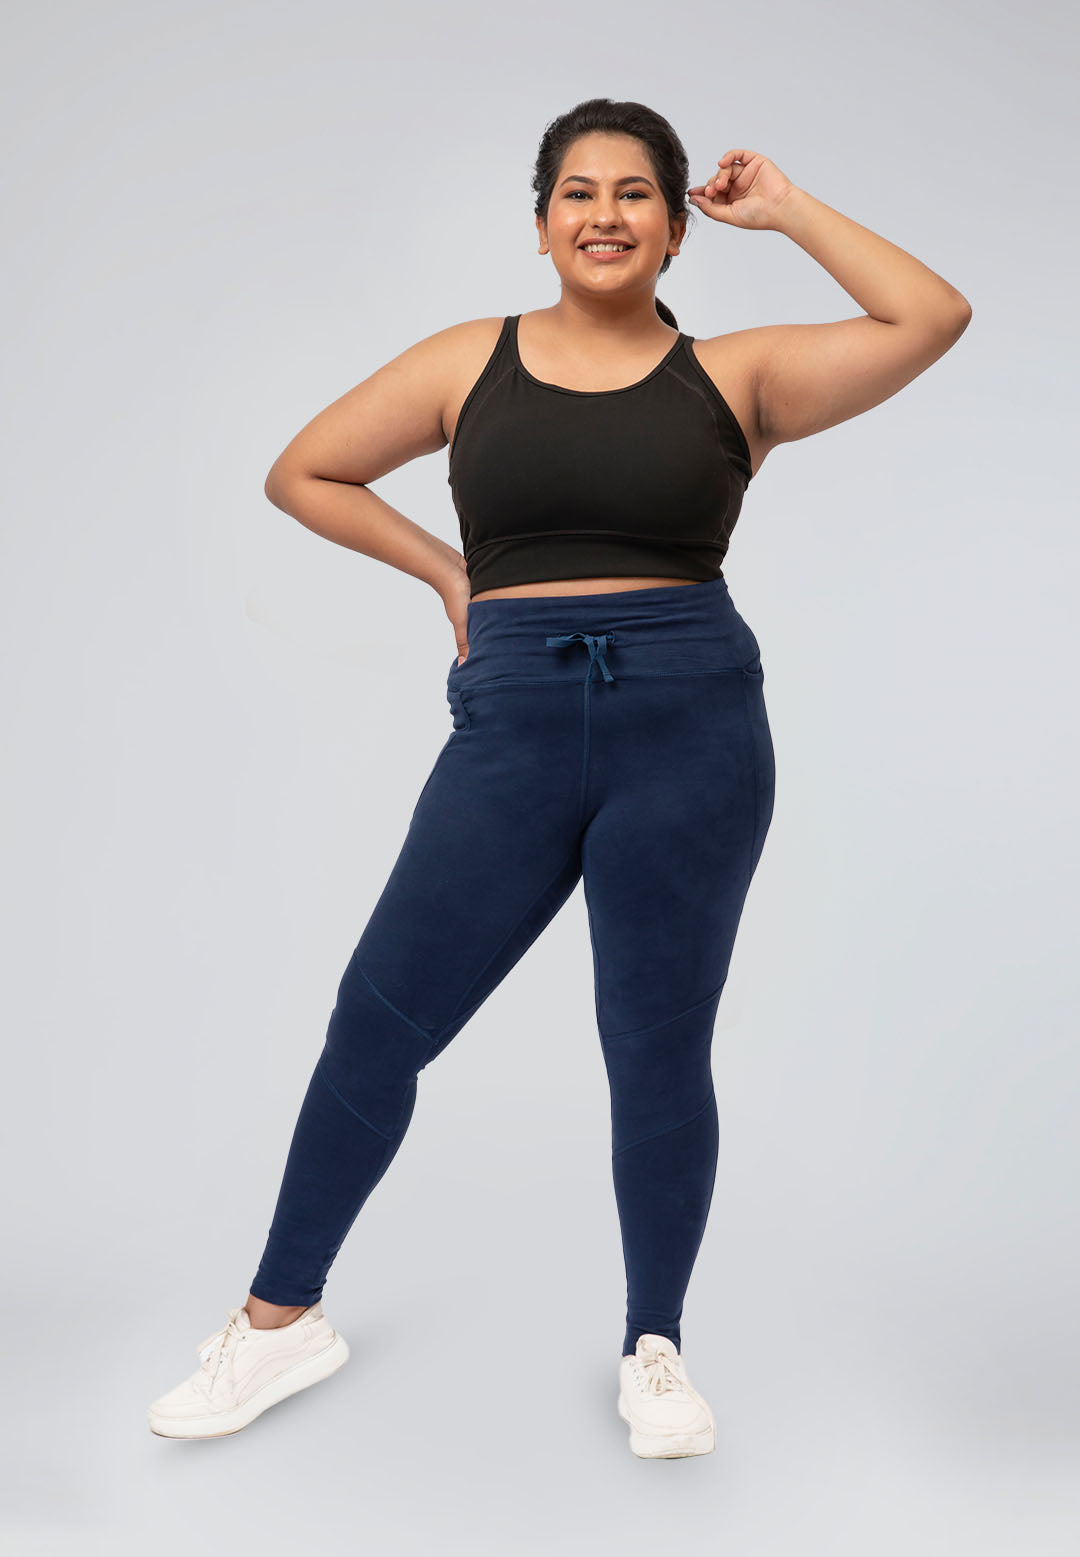 High-Waisted Cotton Ankle Length Leggings with 2 Pockets